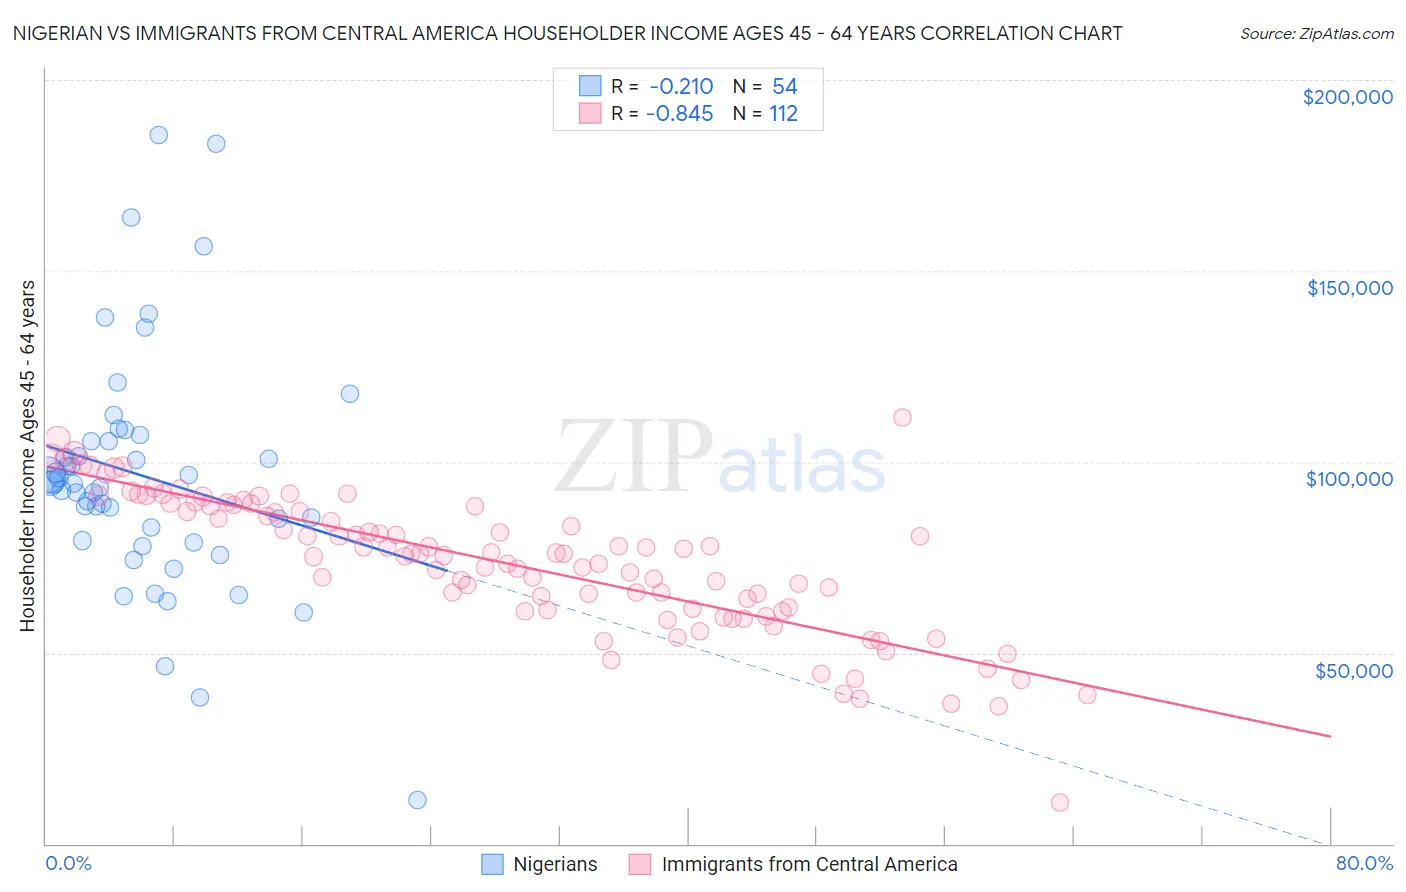 Nigerian vs Immigrants from Central America Householder Income Ages 45 - 64 years